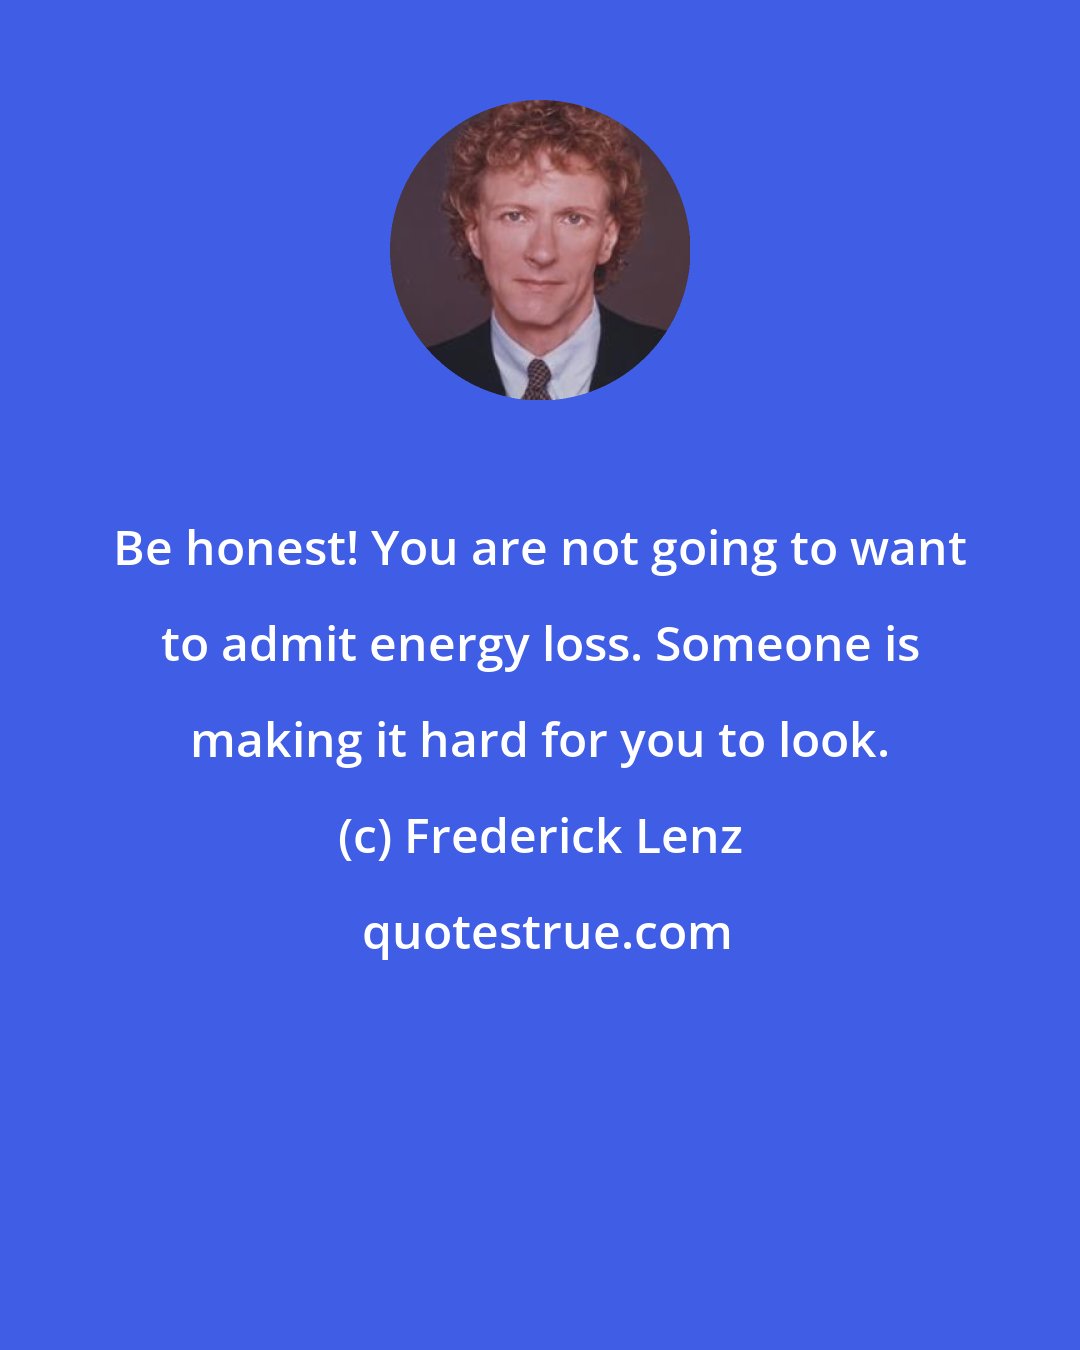 Frederick Lenz: Be honest! You are not going to want to admit energy loss. Someone is making it hard for you to look.